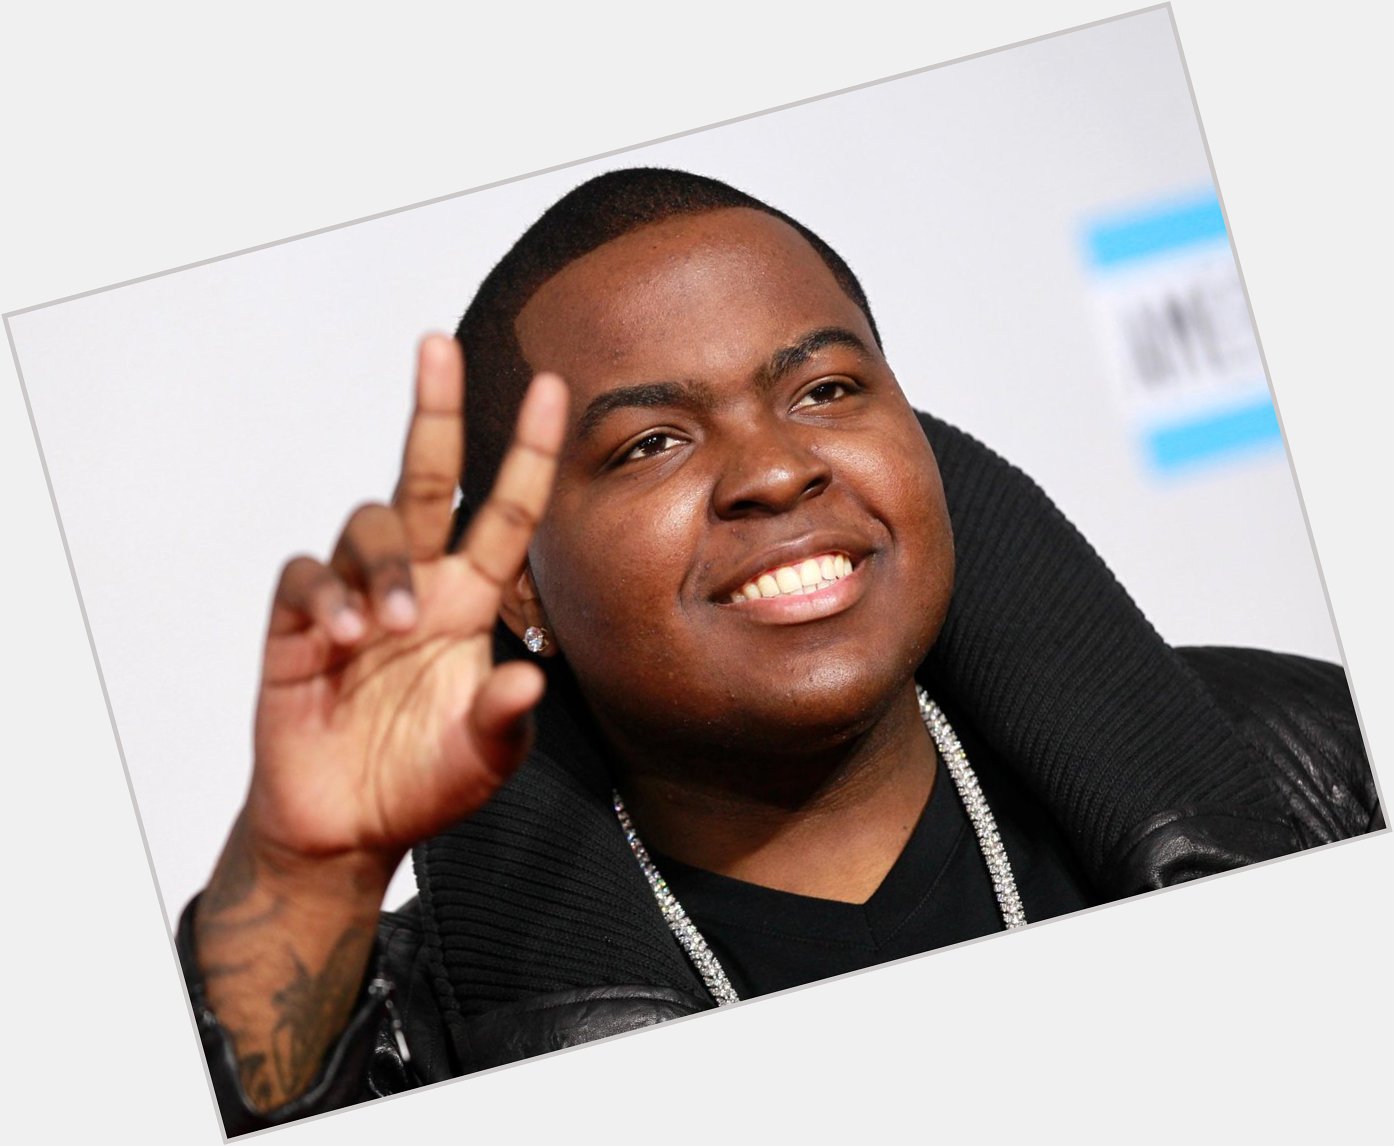 Happy Birthday Beautiful Girls
Fire Burning
Beat It

Which is your fav Sean Kingston song? 